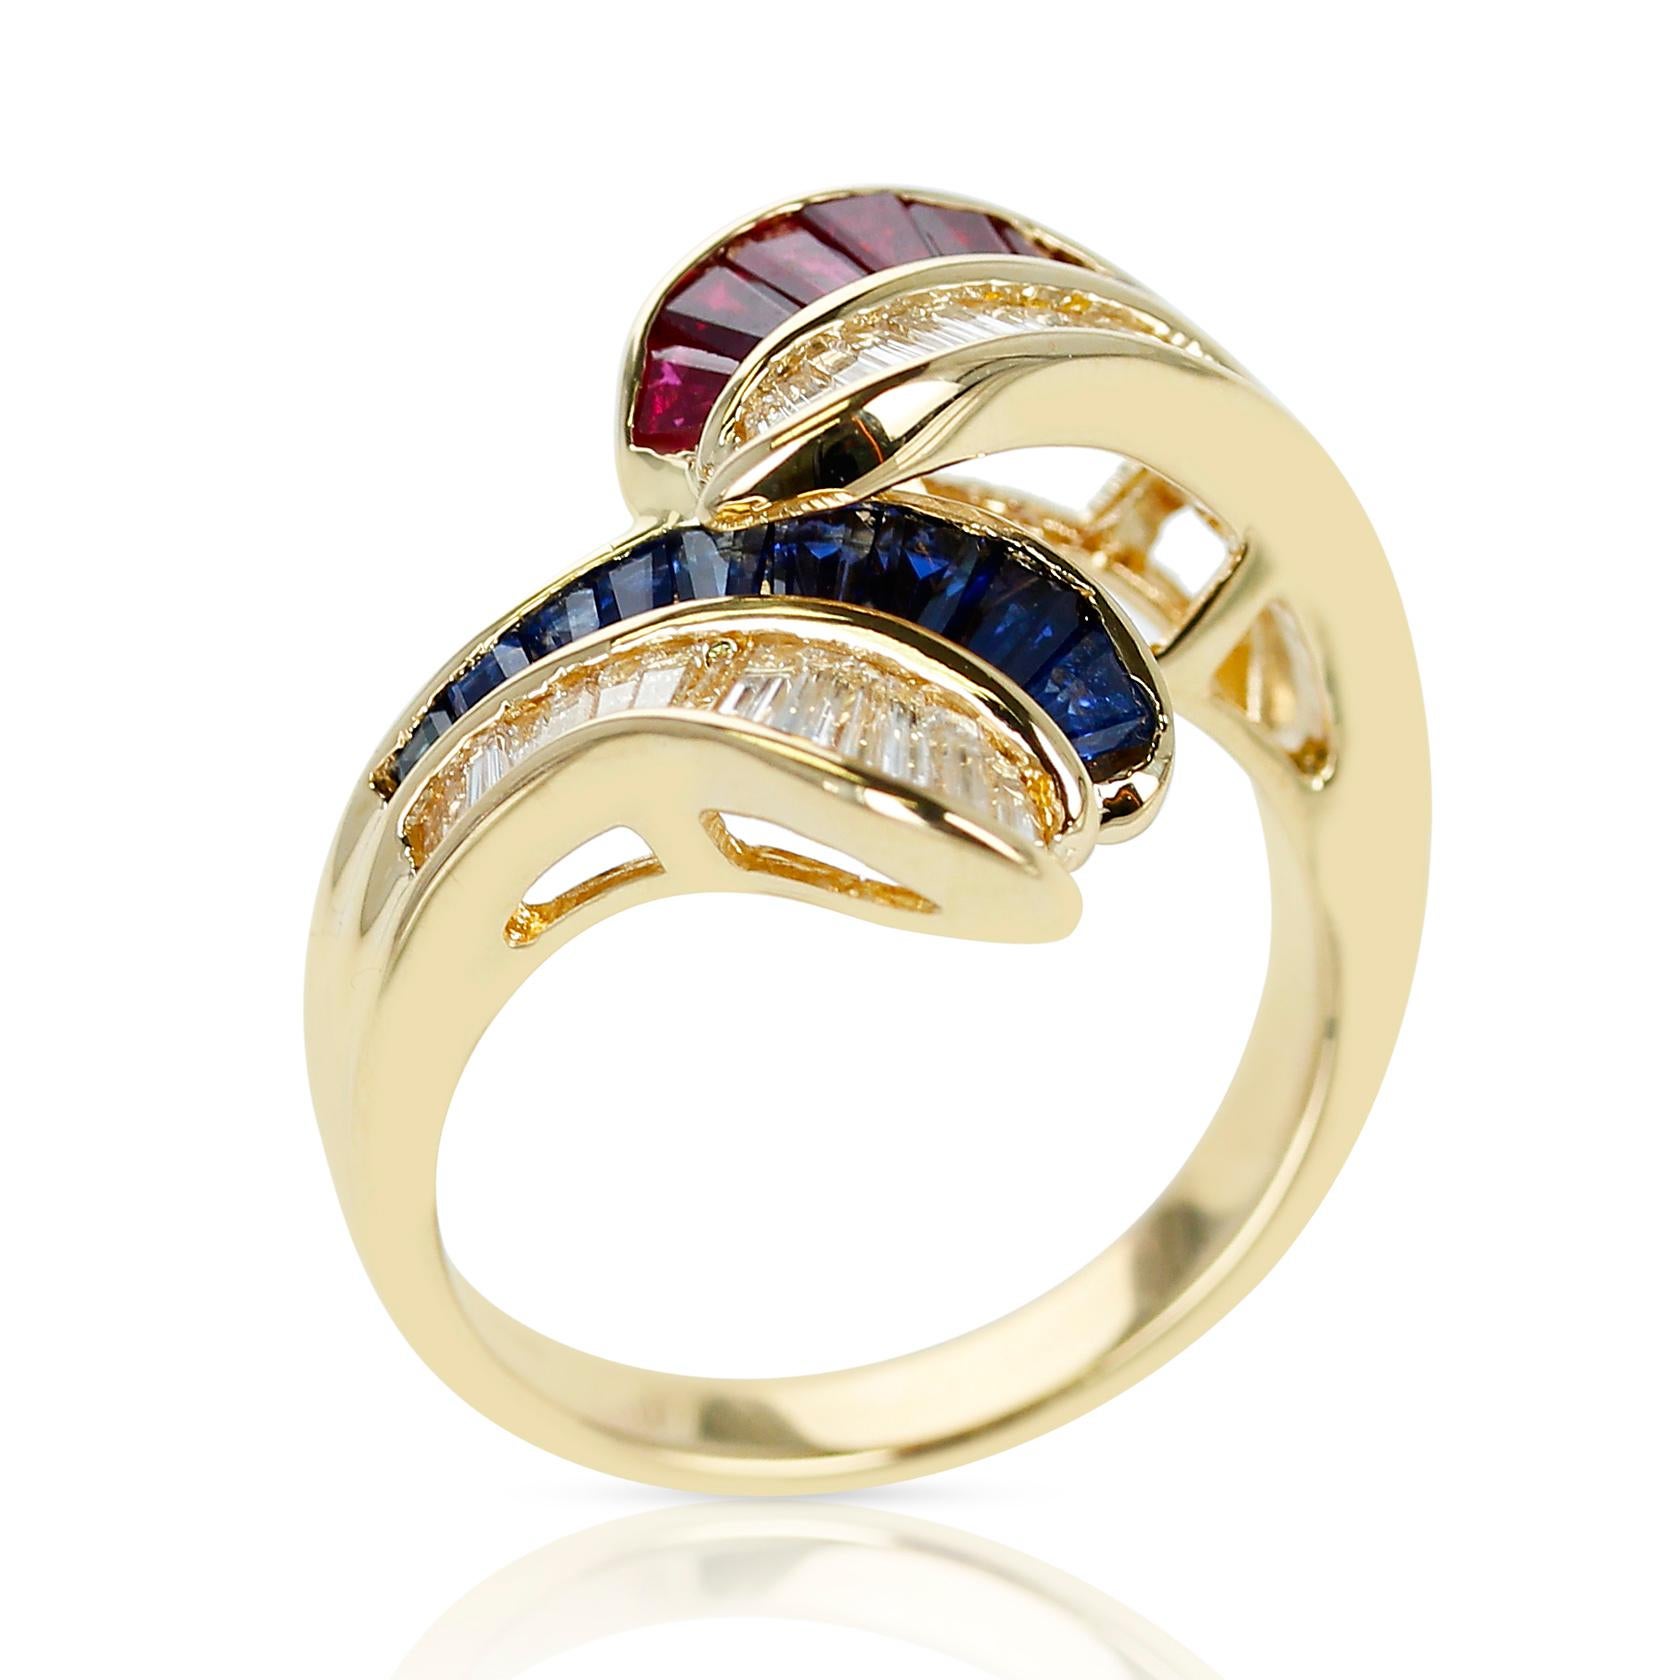 Baguette Cut 0.85 Ct. Ruby, 0.85 Ct. Sapphire and 0.84 Ct. Diamond Overlapping Ring, 18k Gold